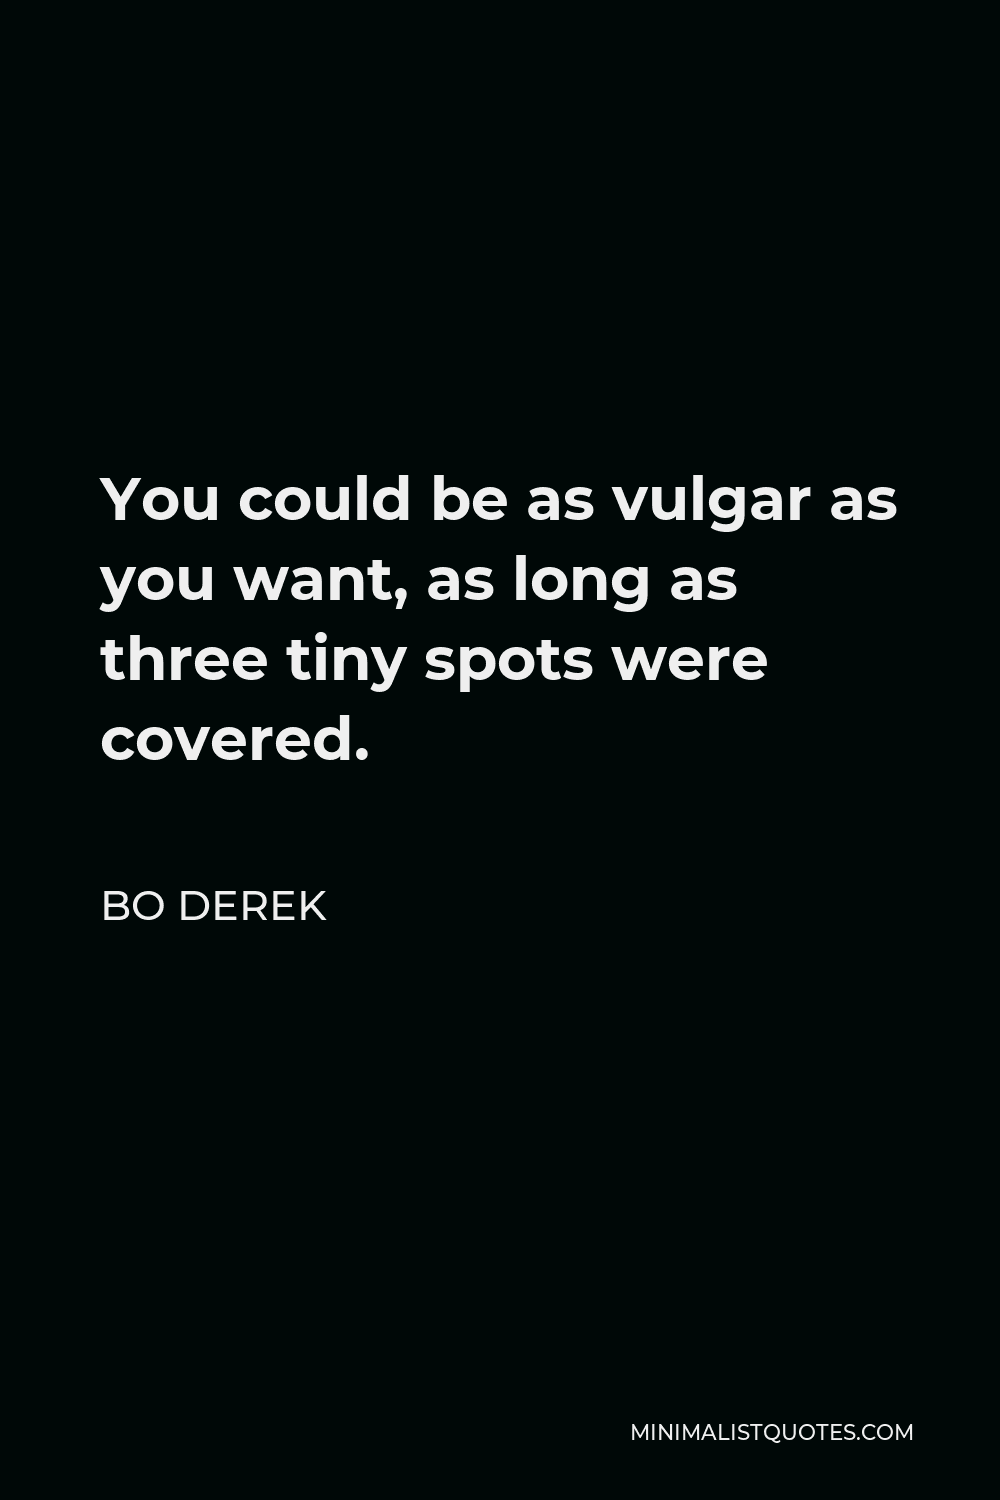 Bo Derek Quote - You could be as vulgar as you want, as long as three tiny spots were covered.